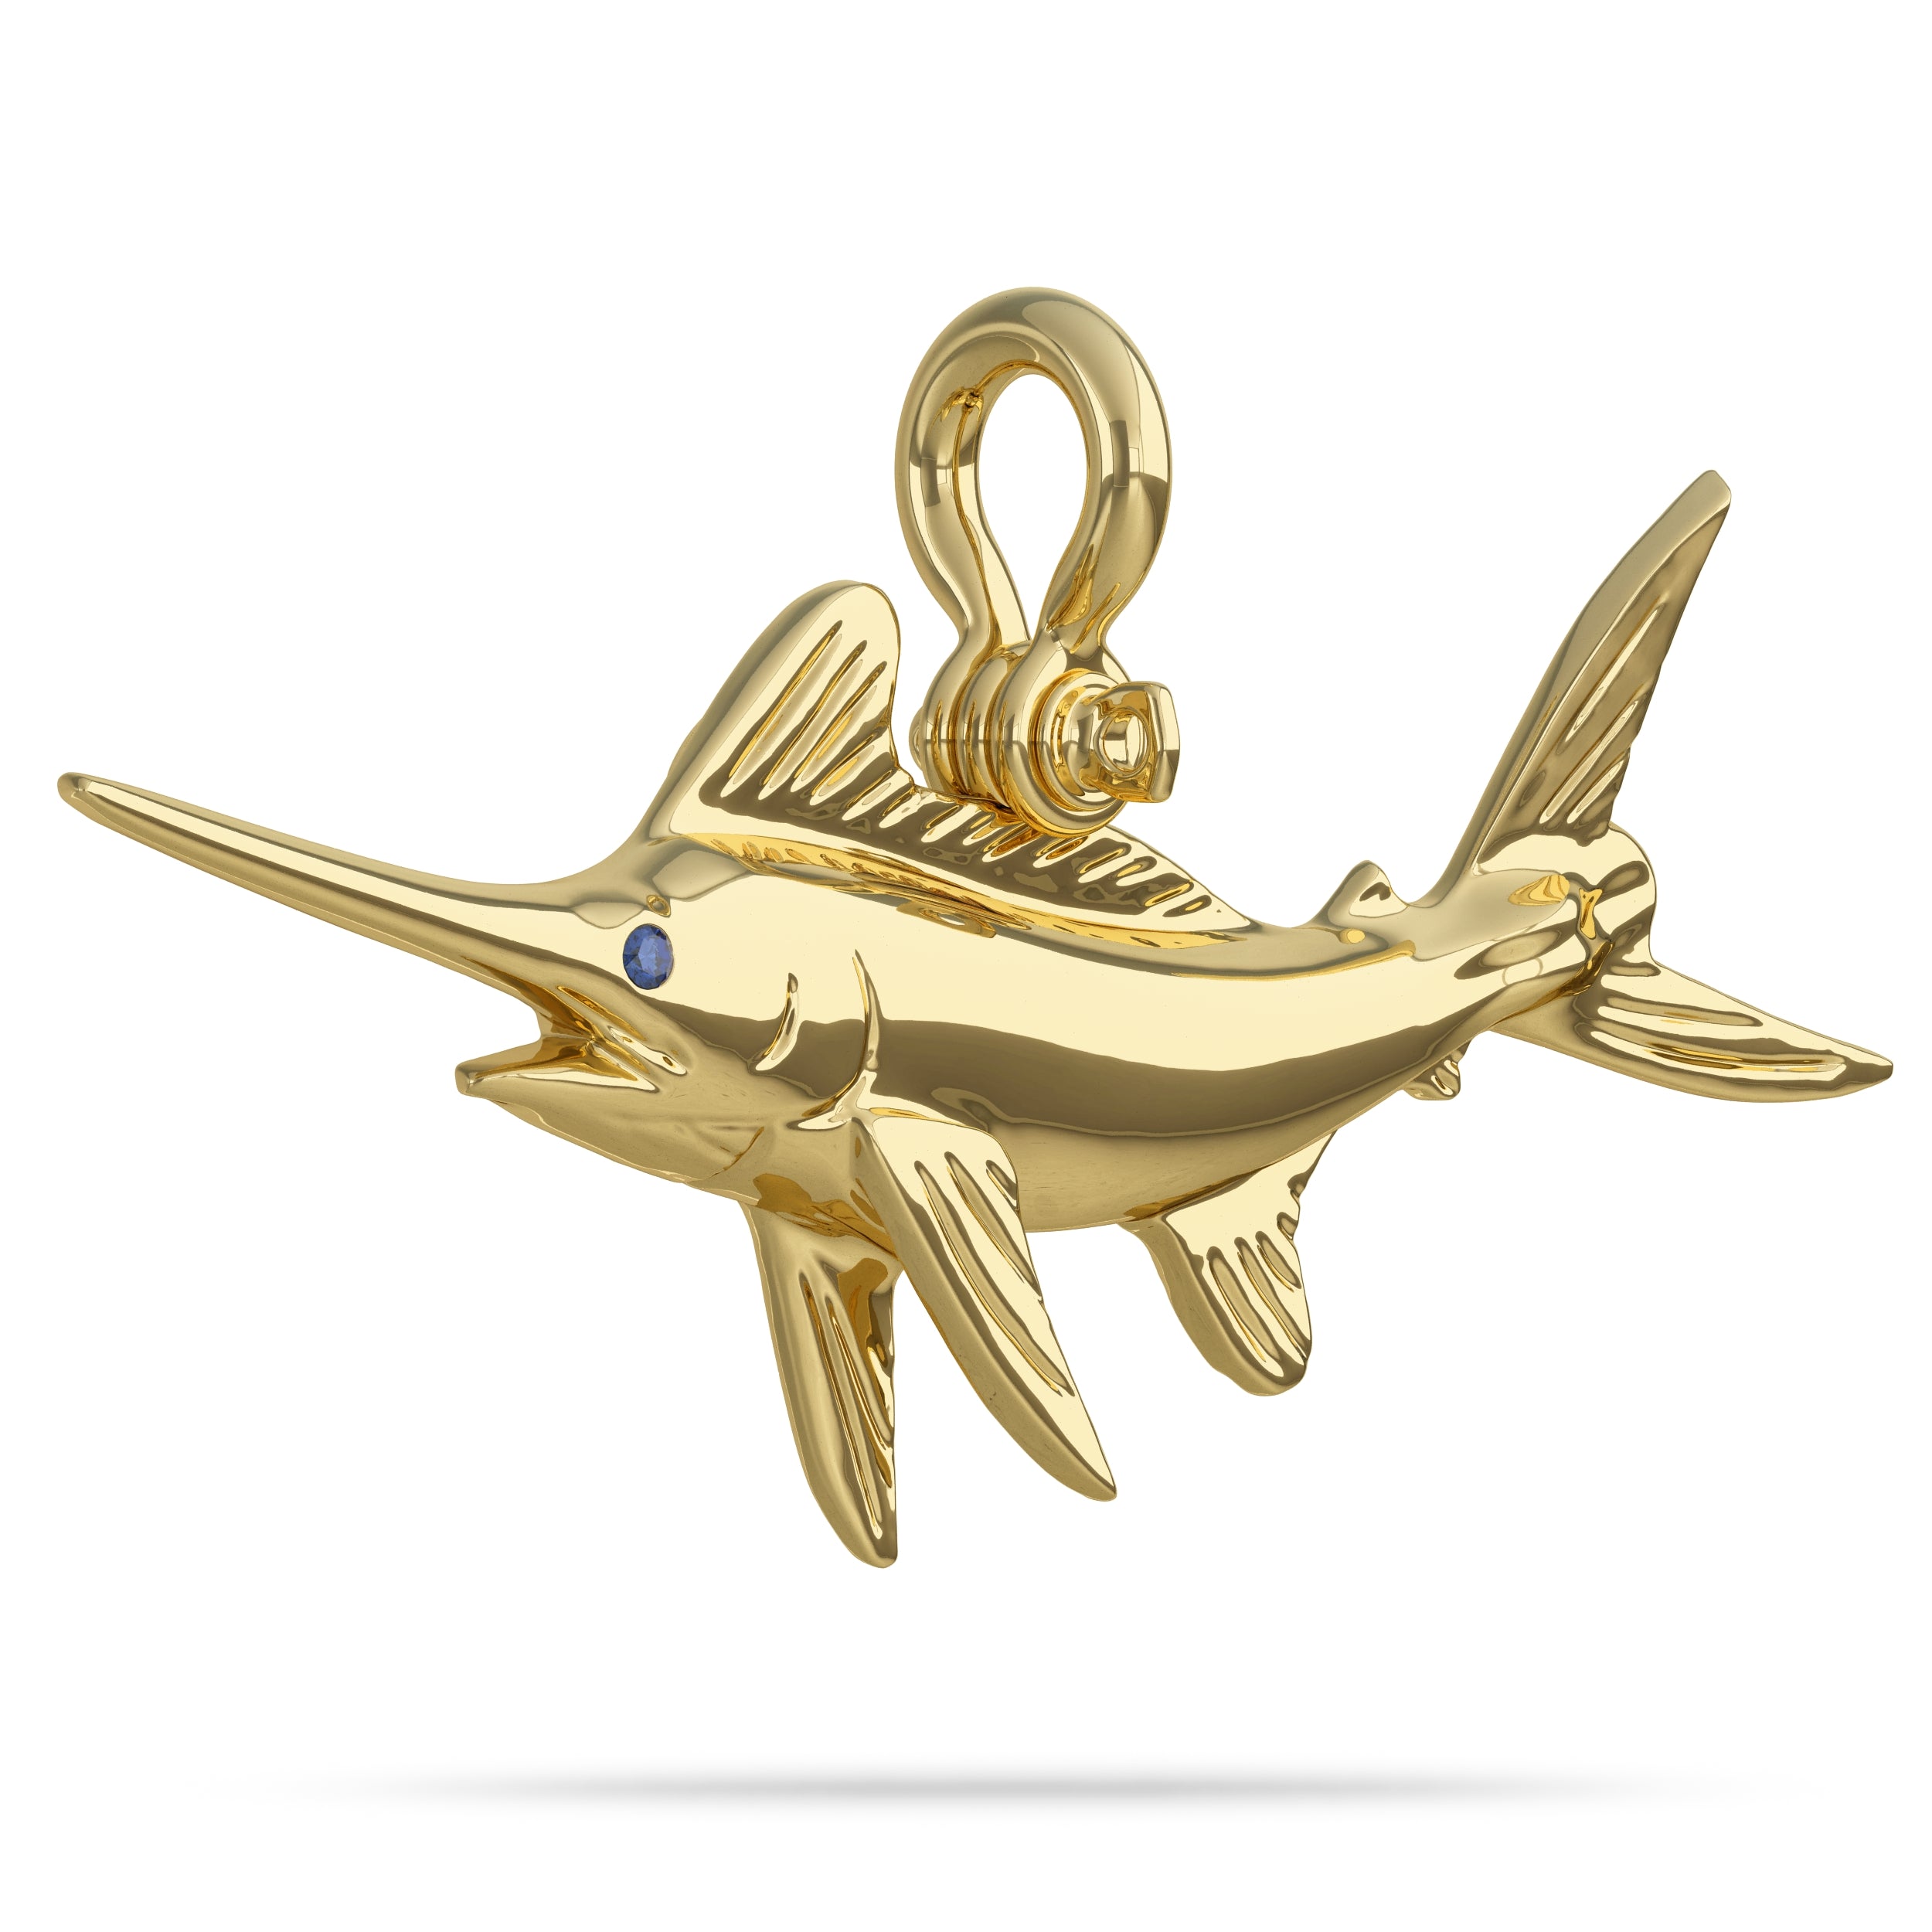 Solid 14k Gold White Marlin Pendant High Polished Mirror Finish With Blue Sapphire Eye with A Mariner Shackle Bail Custom Designed By Nautical Treasure Jewelry In The Florida Keys Open